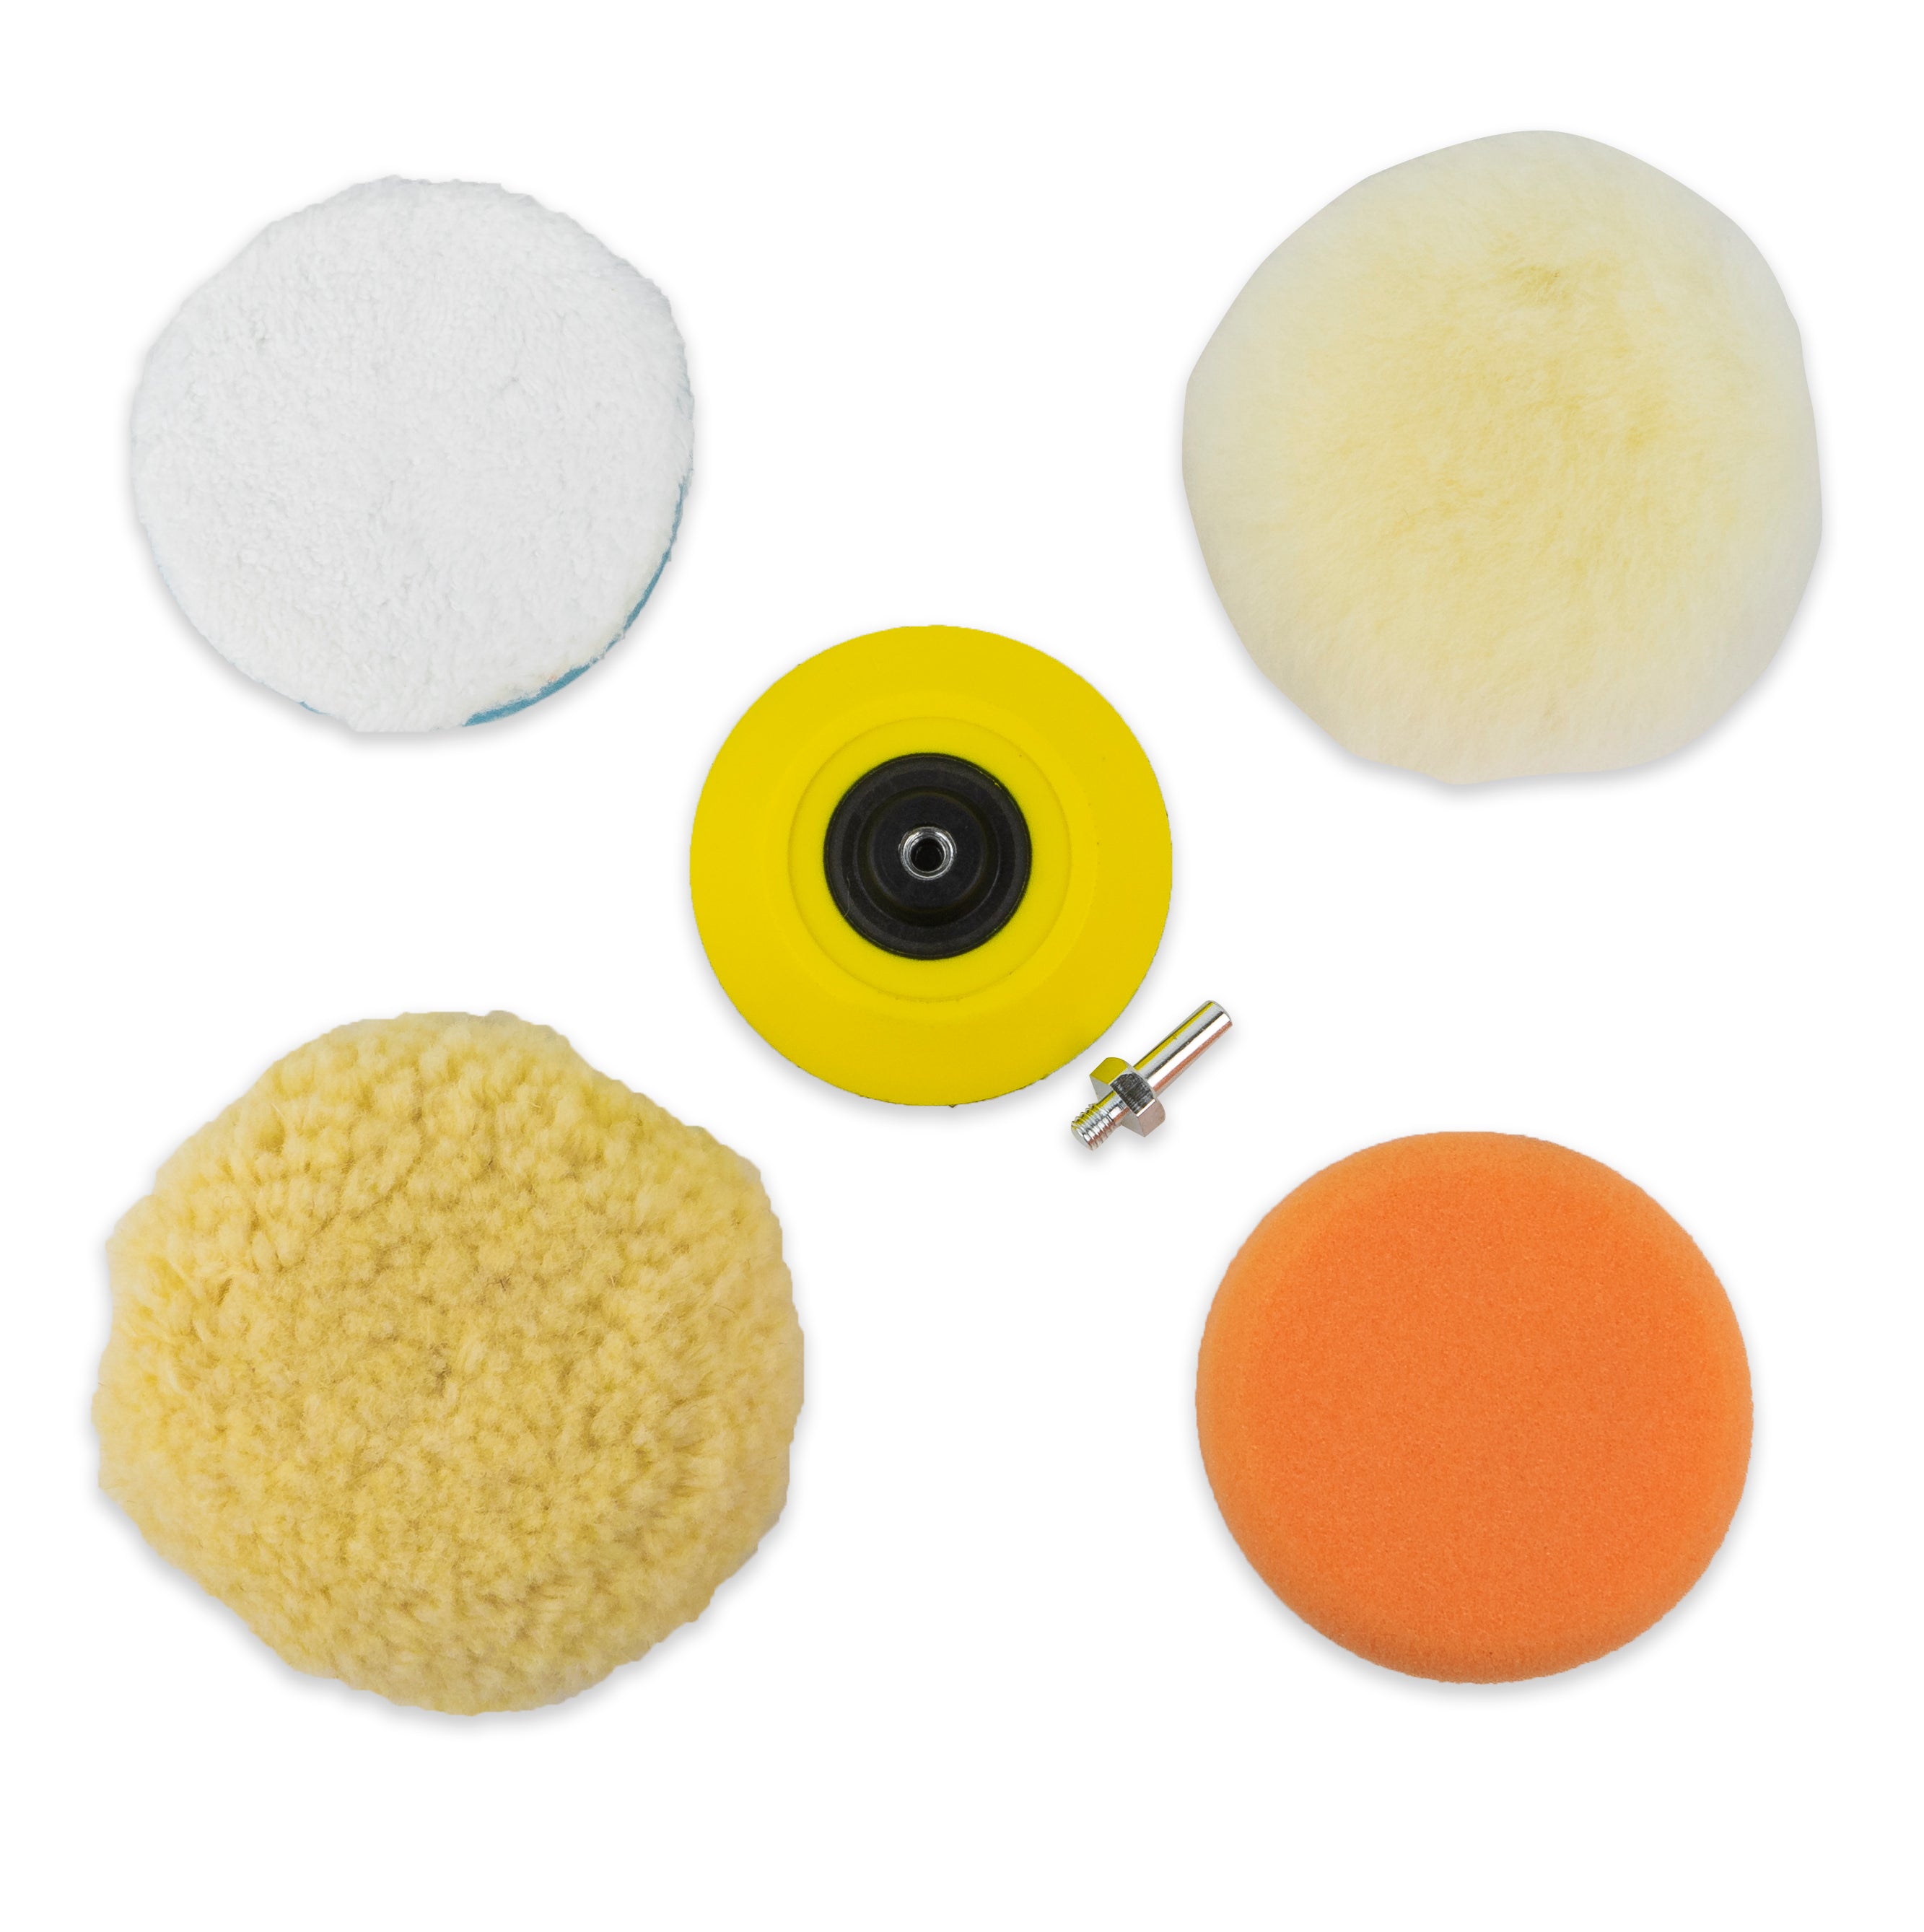 TGR 3" Car Buffing & Polishing Pad Kit - Turn Your Drill into Power Polisher - Foam & Wool Pads - Hook & Loop Backing Pad with Adapter